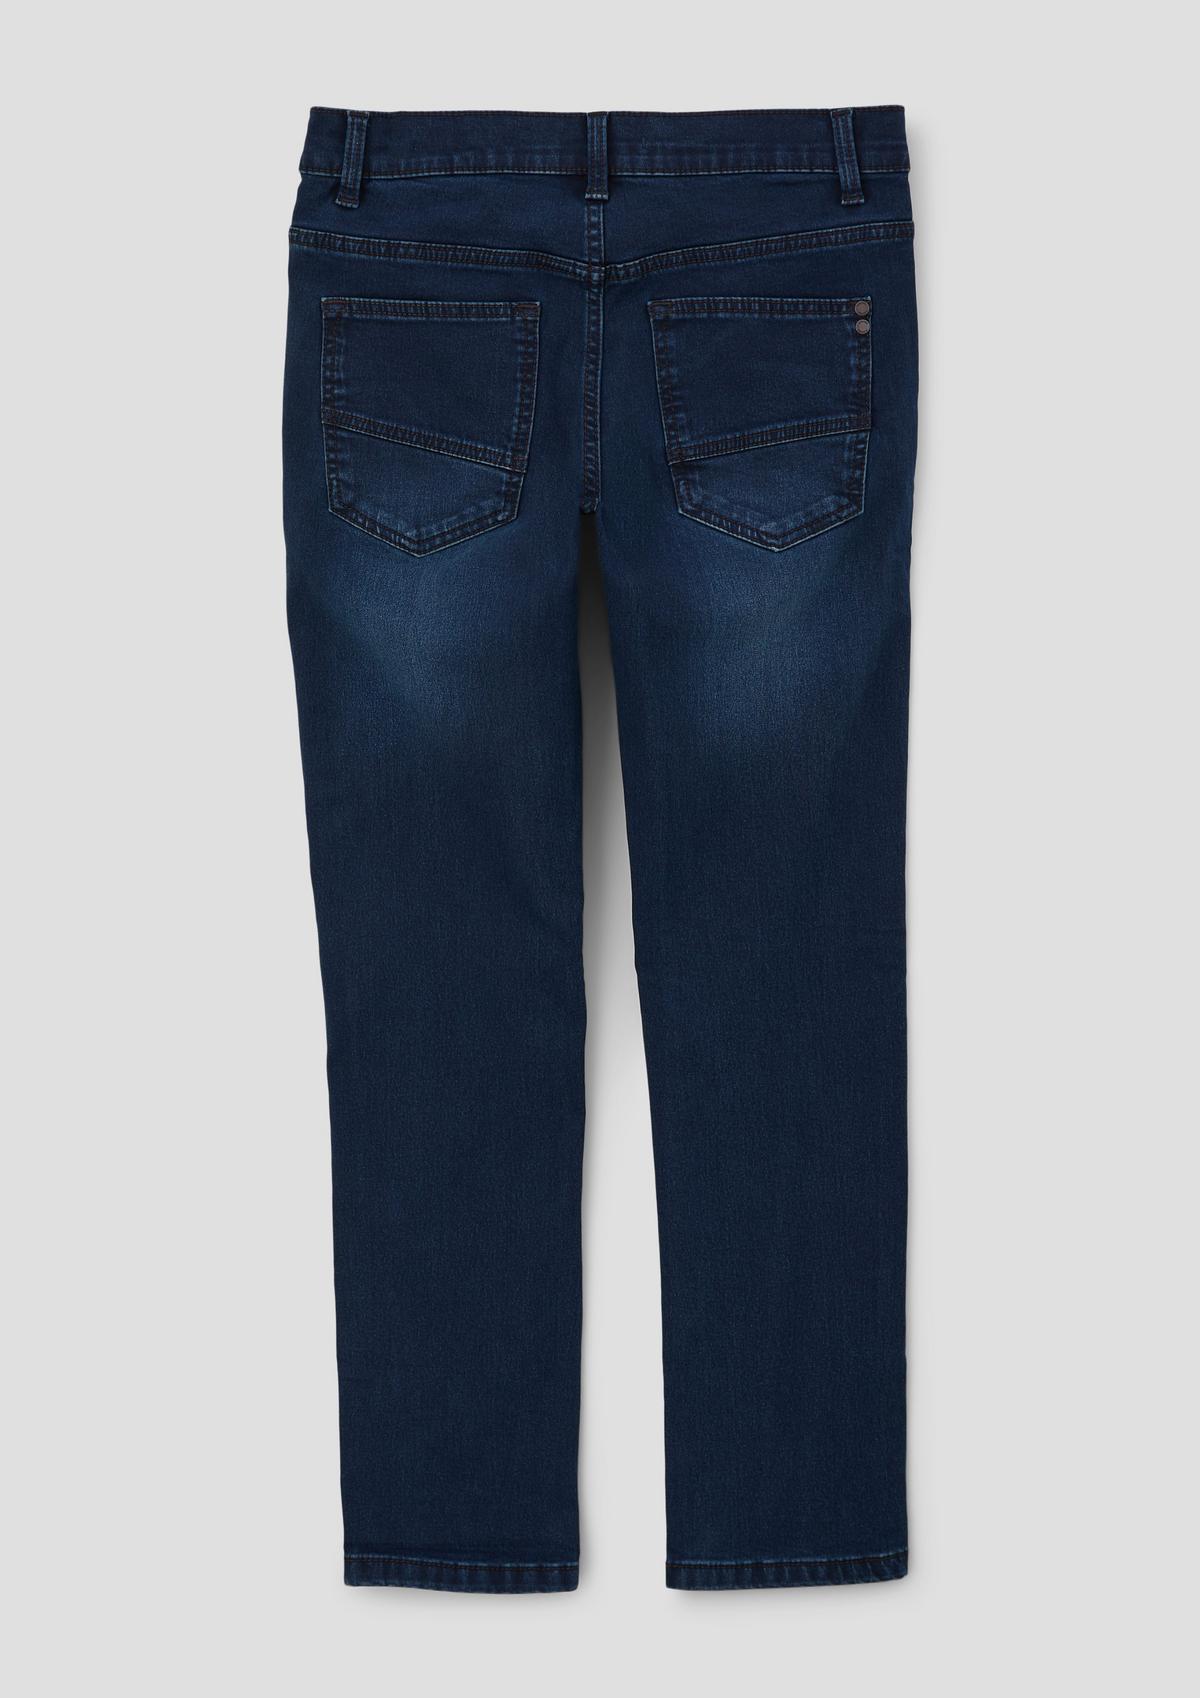 s.Oliver Seattle jeans / regular fit / mid rise / straight leg